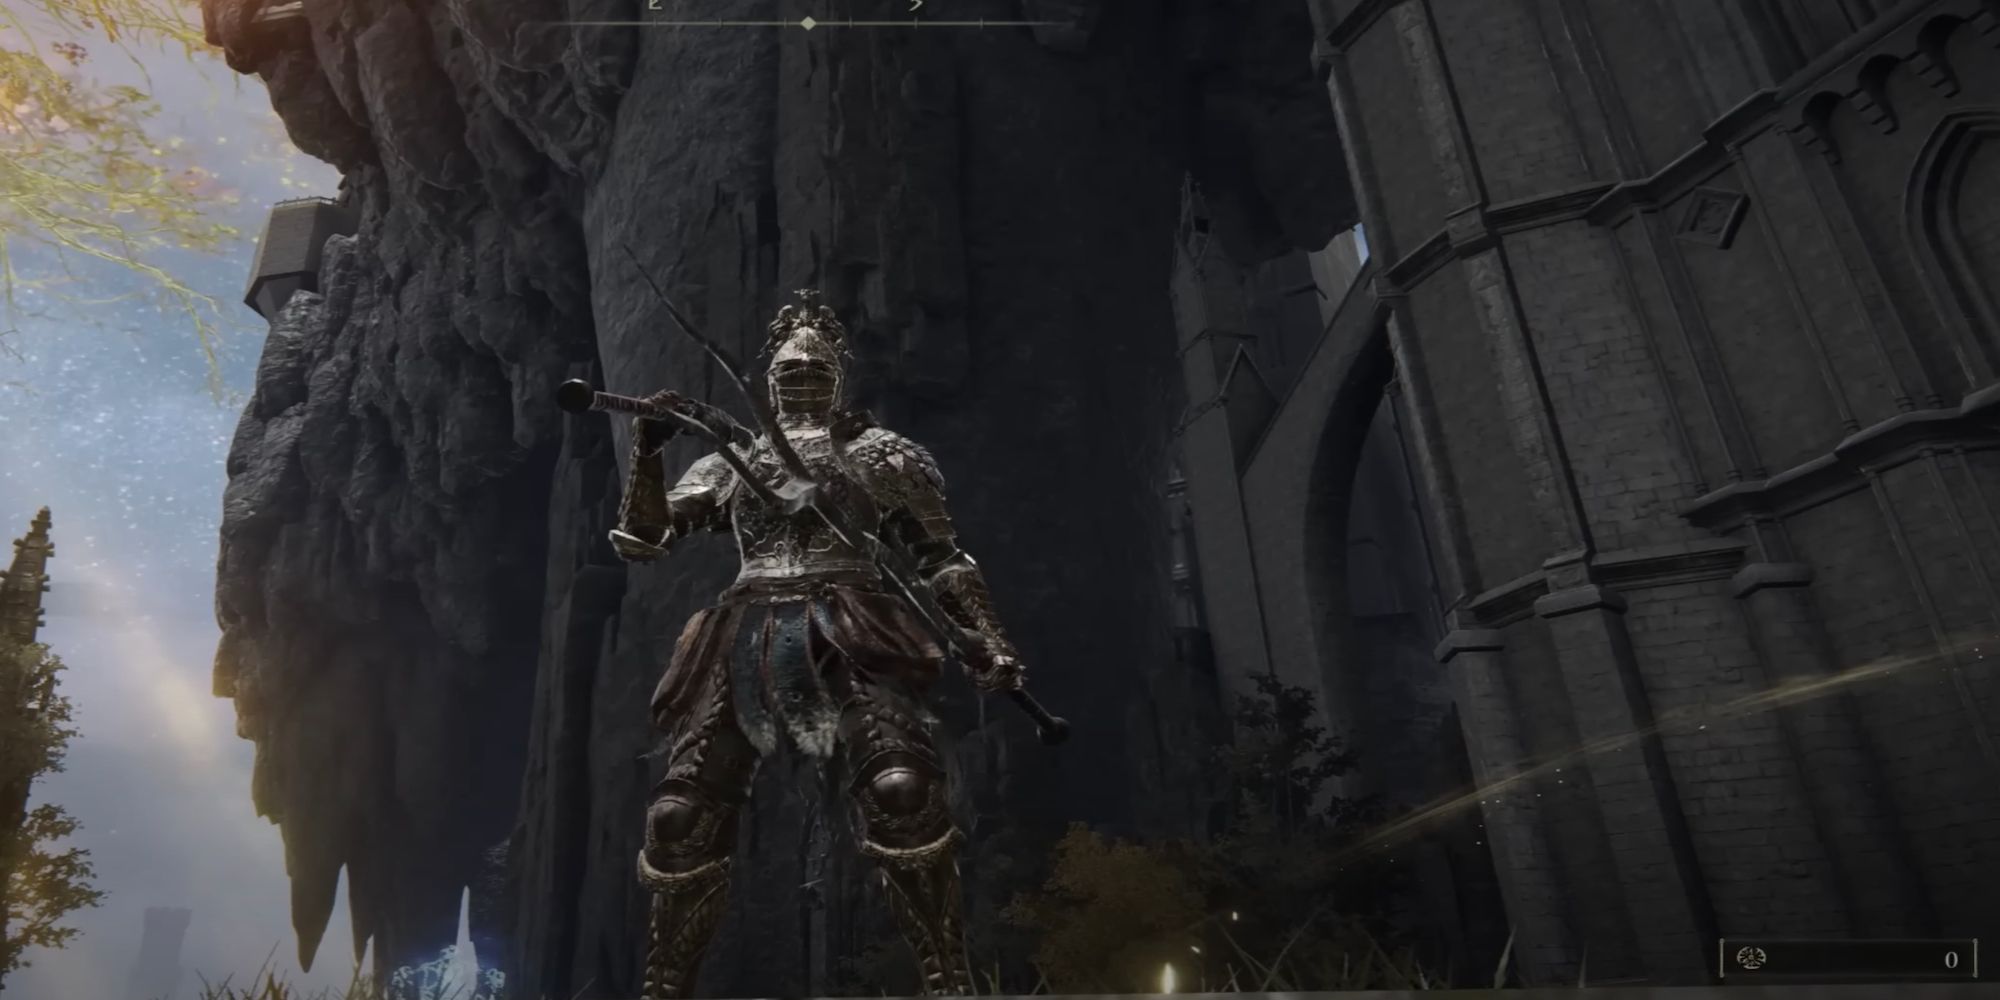 Player holding the Forked Greatsword (Elden Ring)